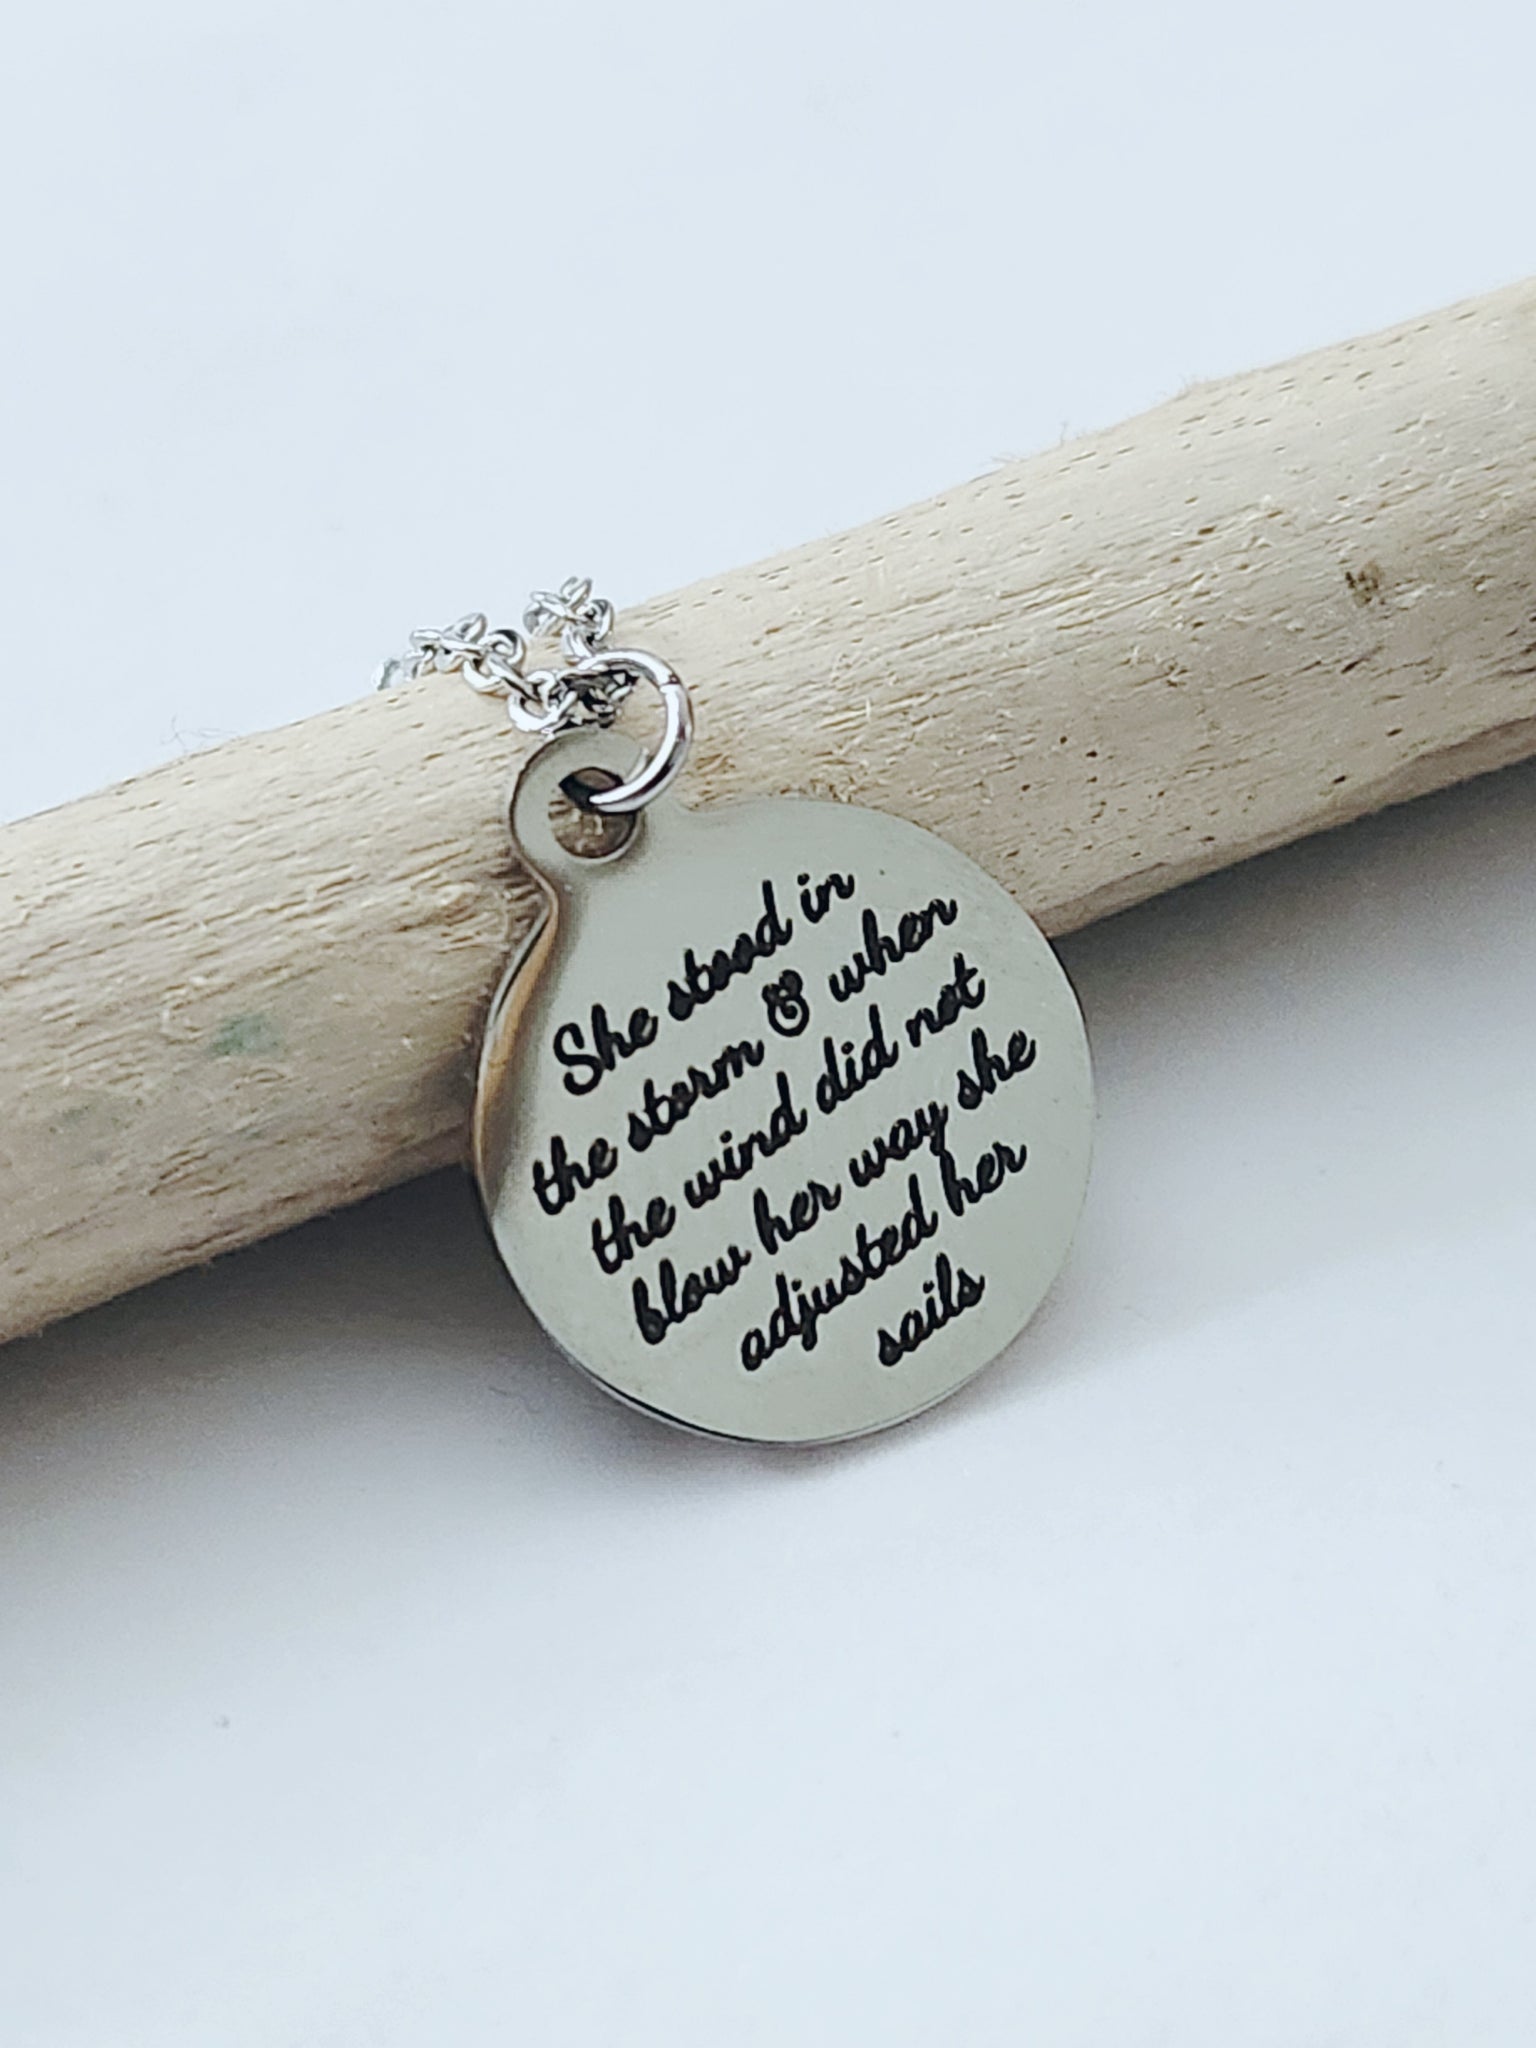 She Stood In The Storm -Charm Necklace